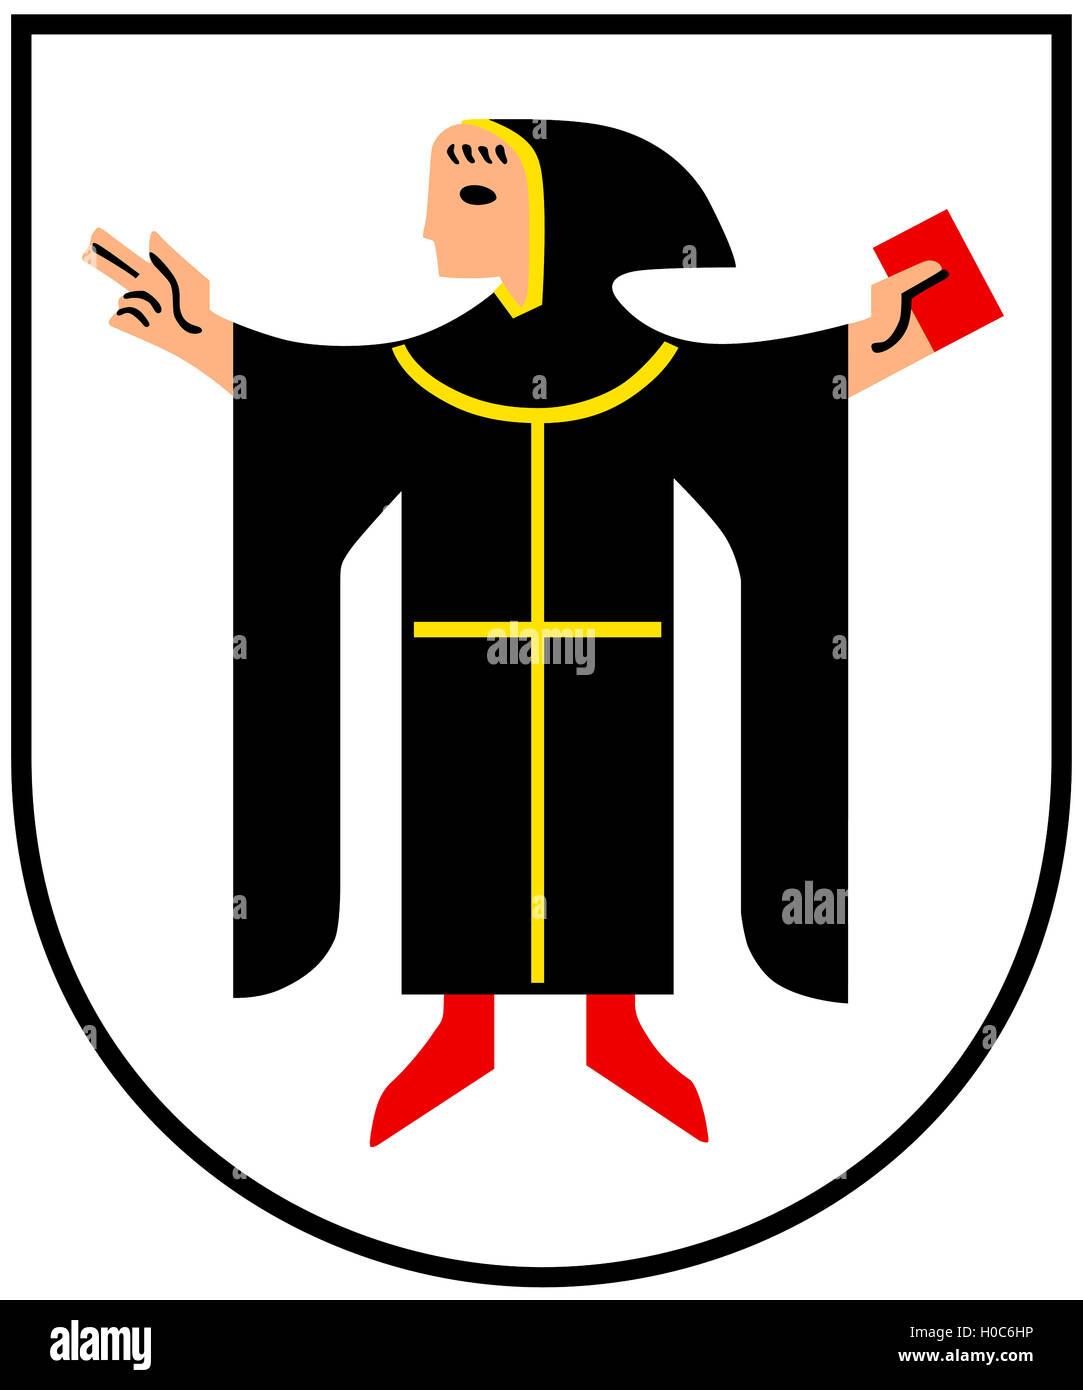 Coat of arms of the Bavarian capital Munich in Germany. Stock Photo